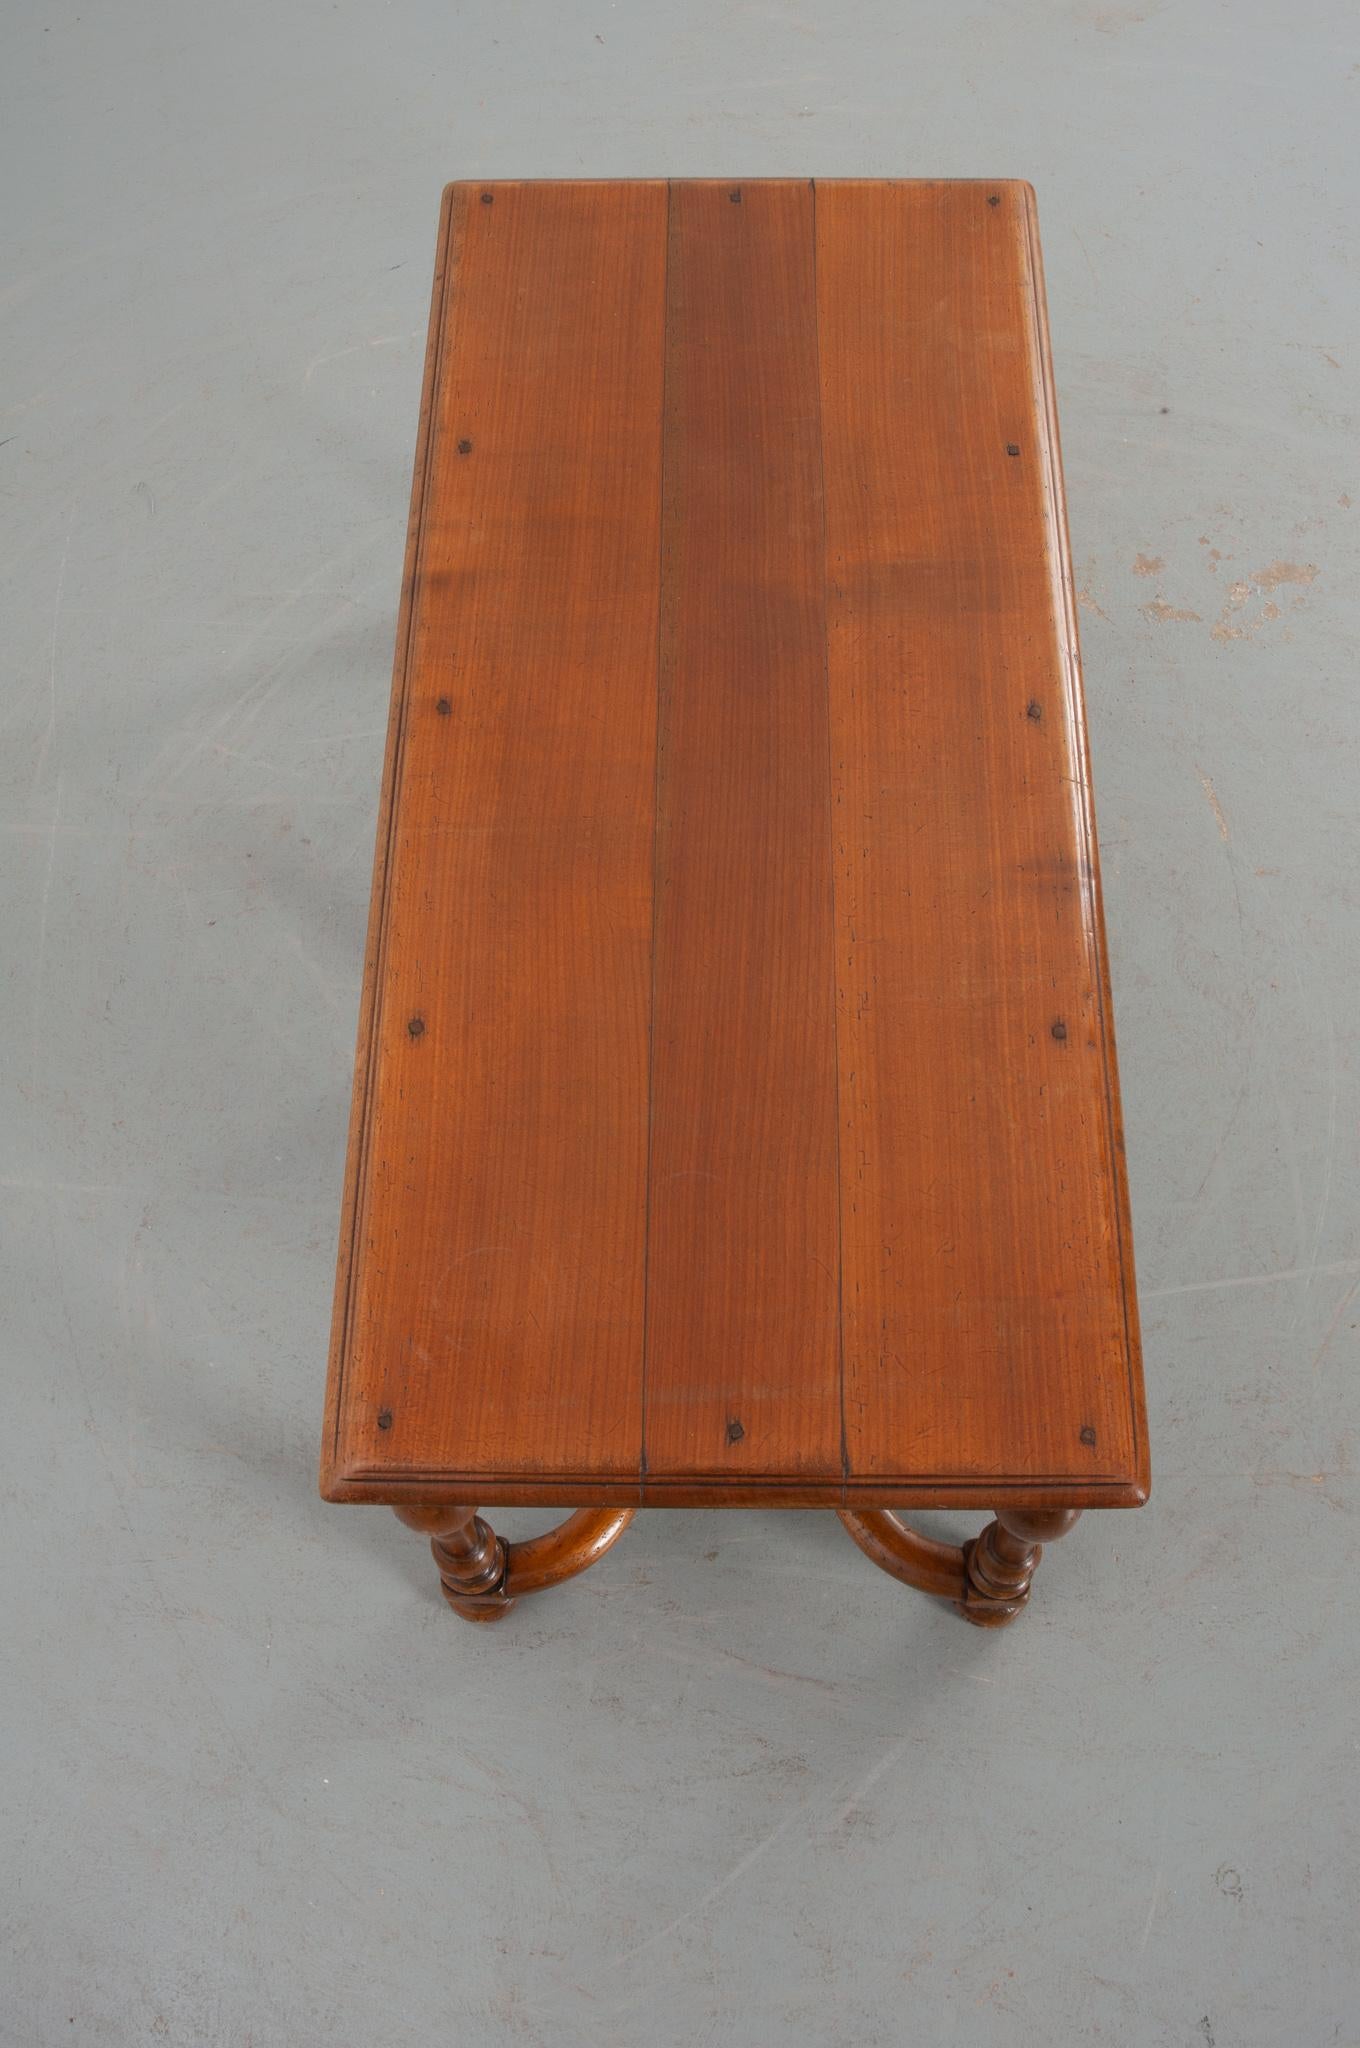 Other French Early 20th Century Fruitwood Low Table